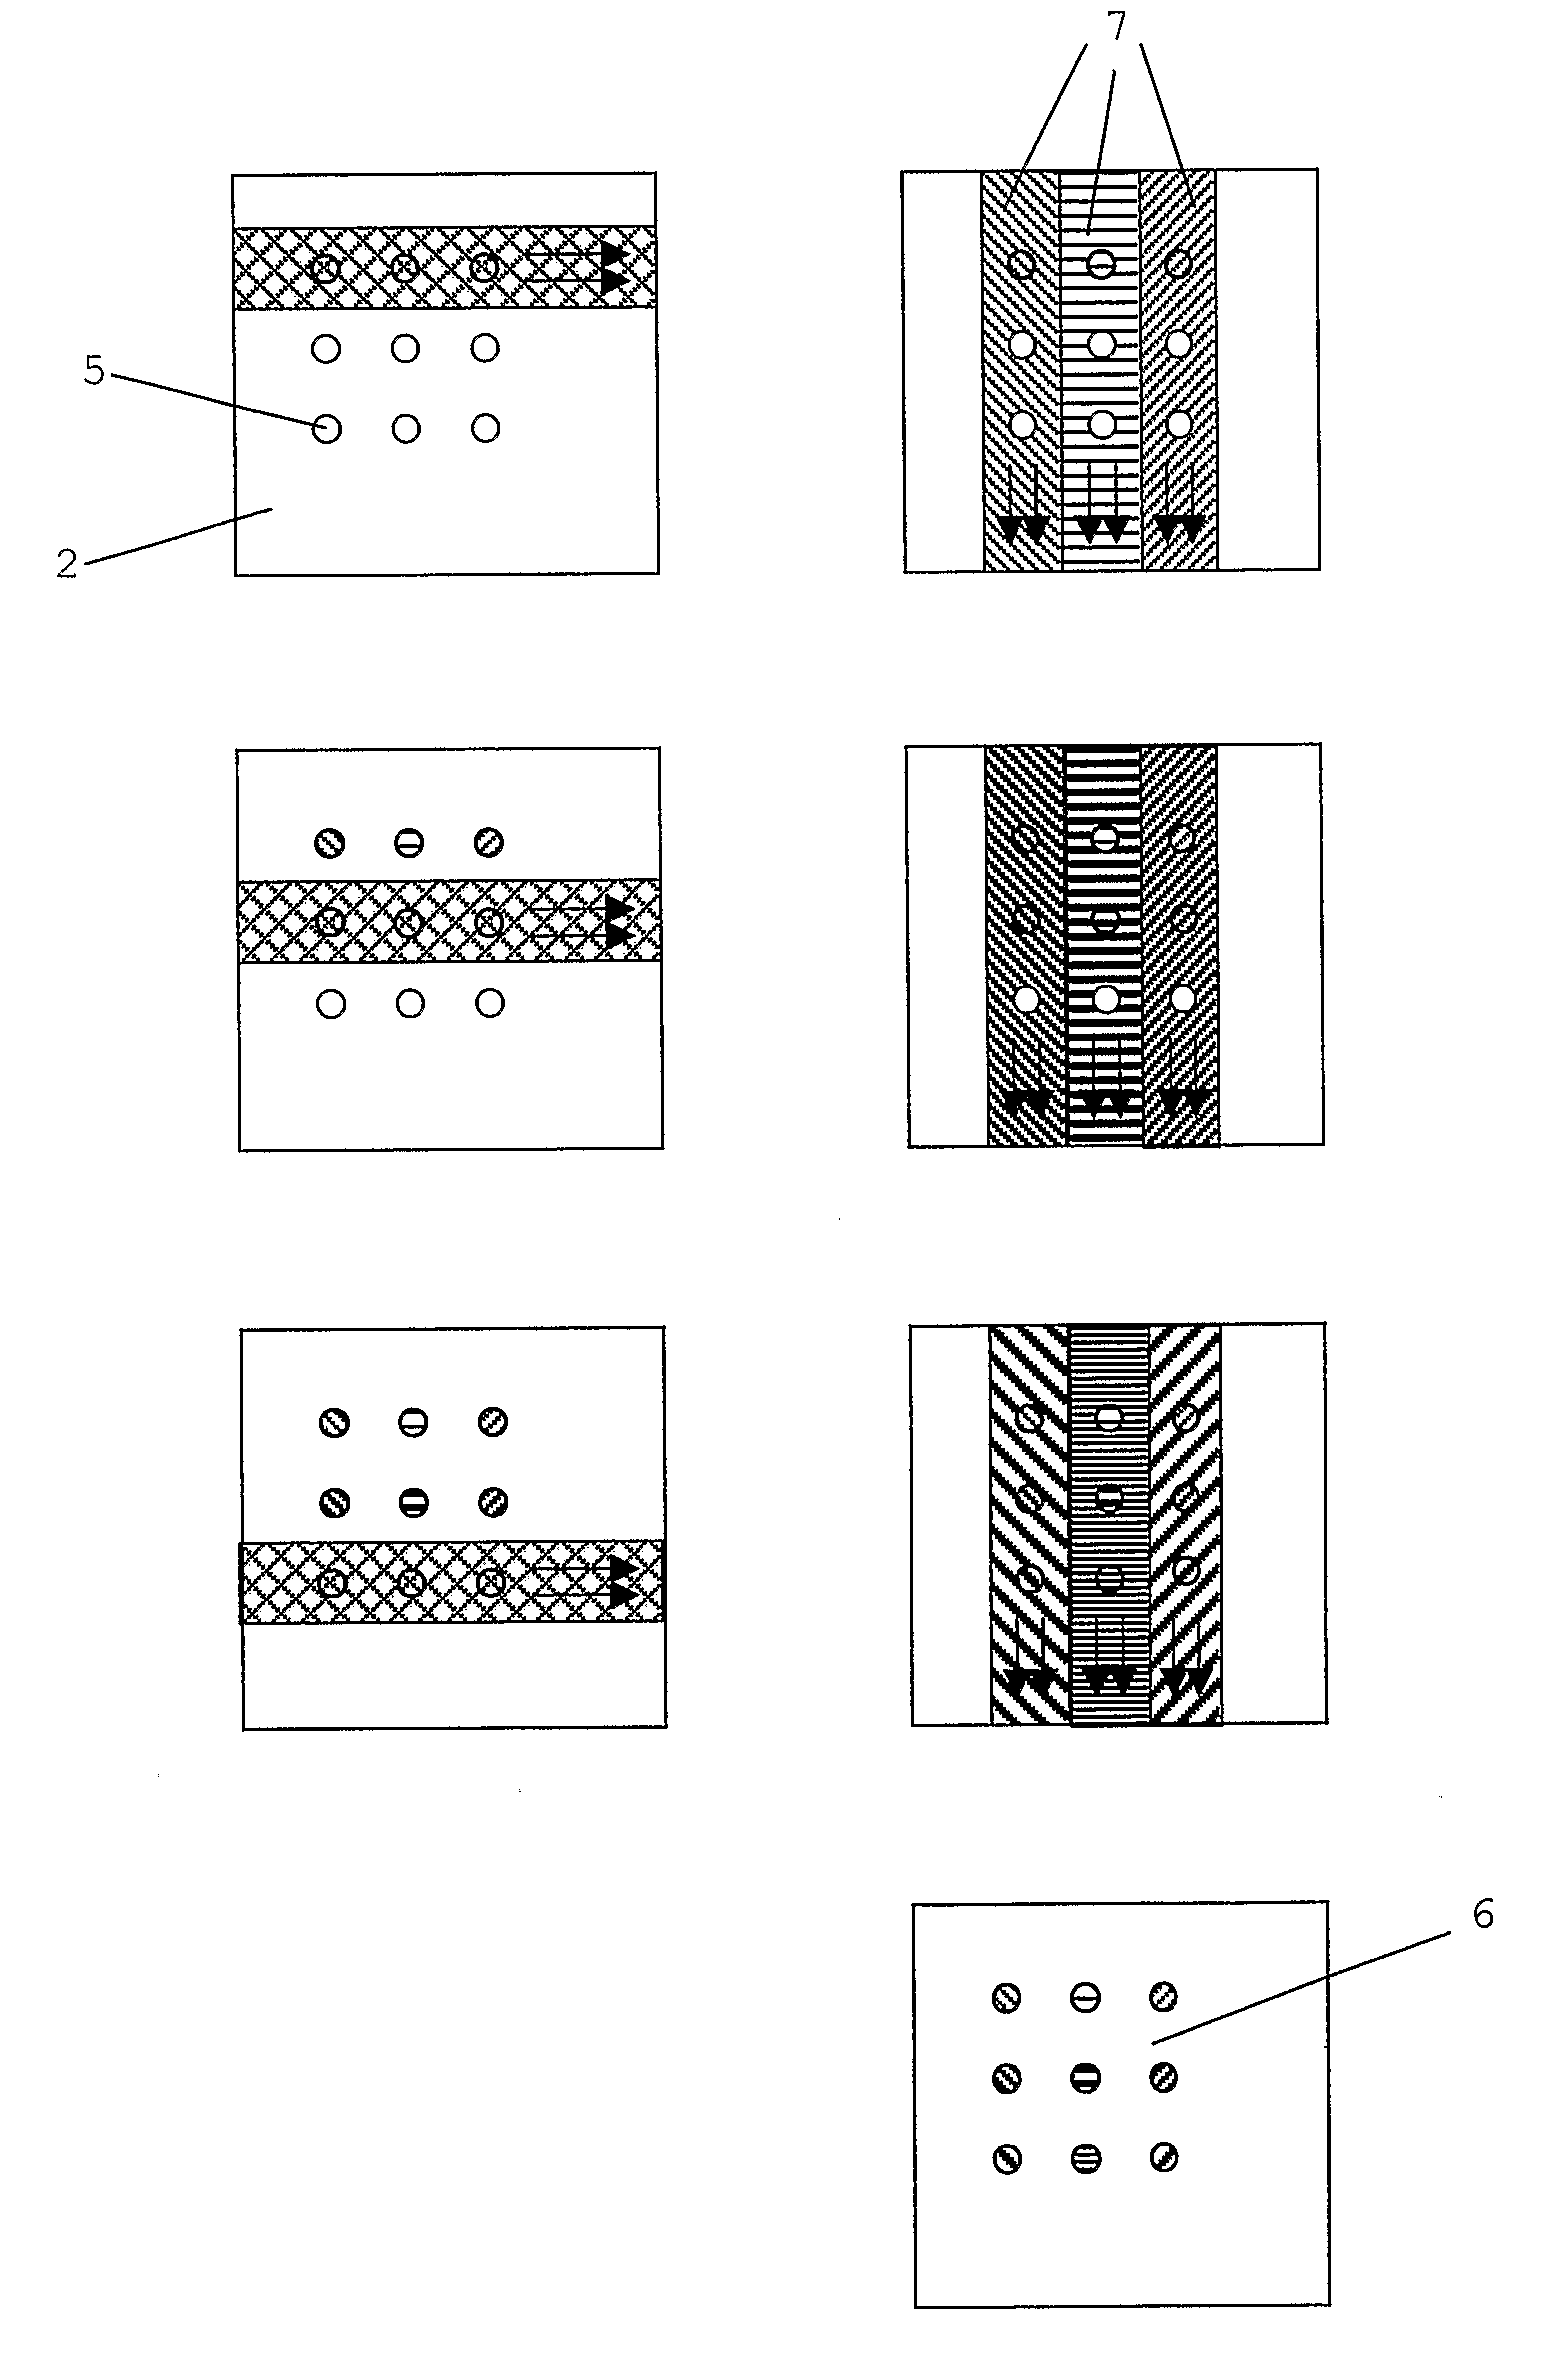 Microfluidic Device for Patterned Surface Modification